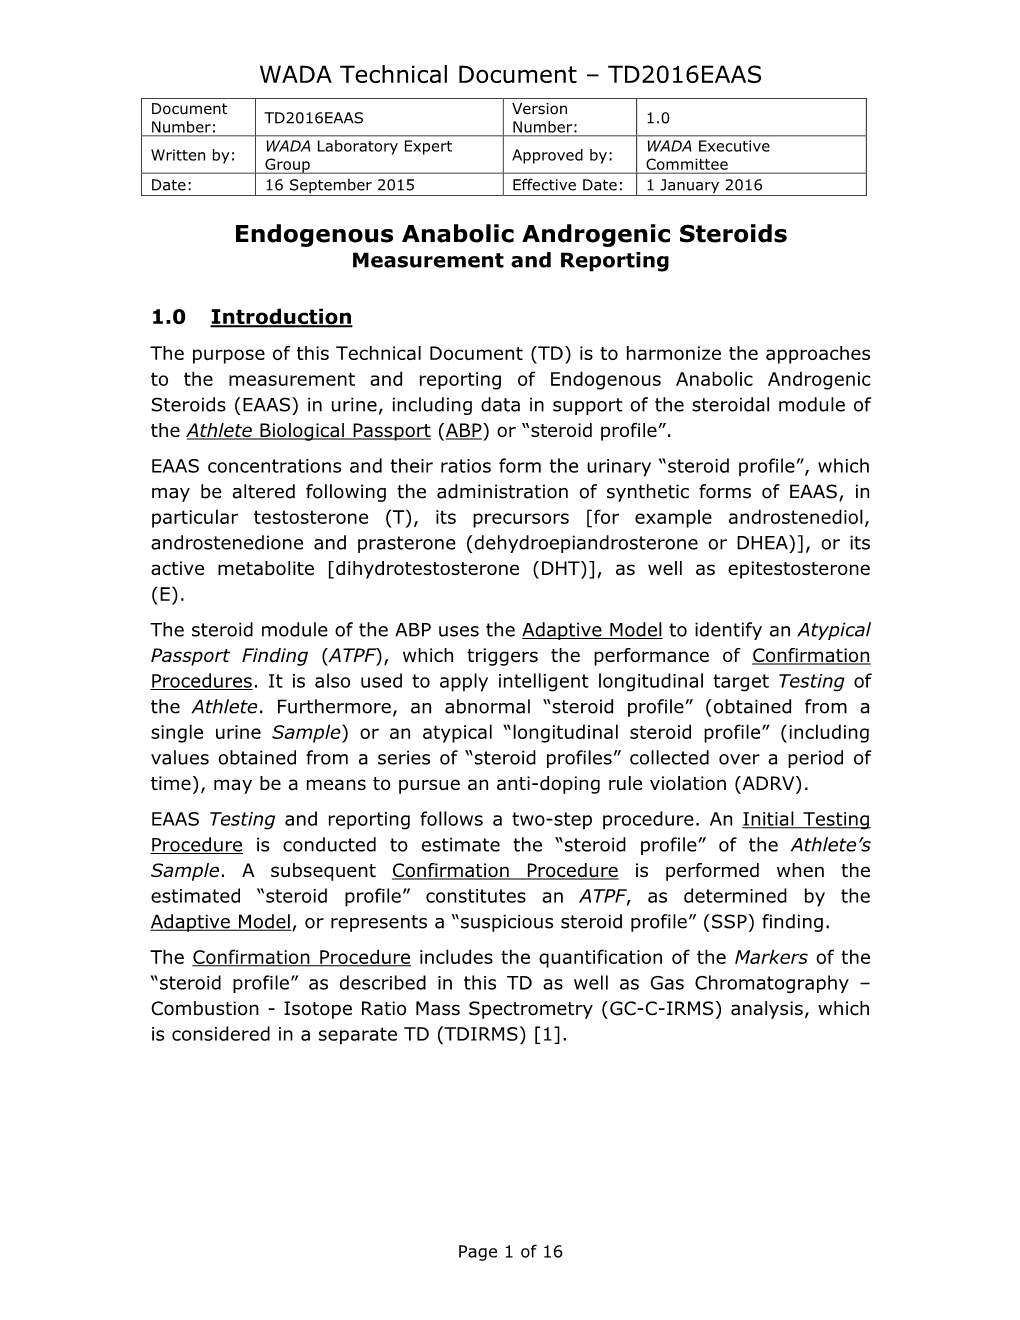 Endogenous Anabolic Androgenic Steroids Measurement and Reporting